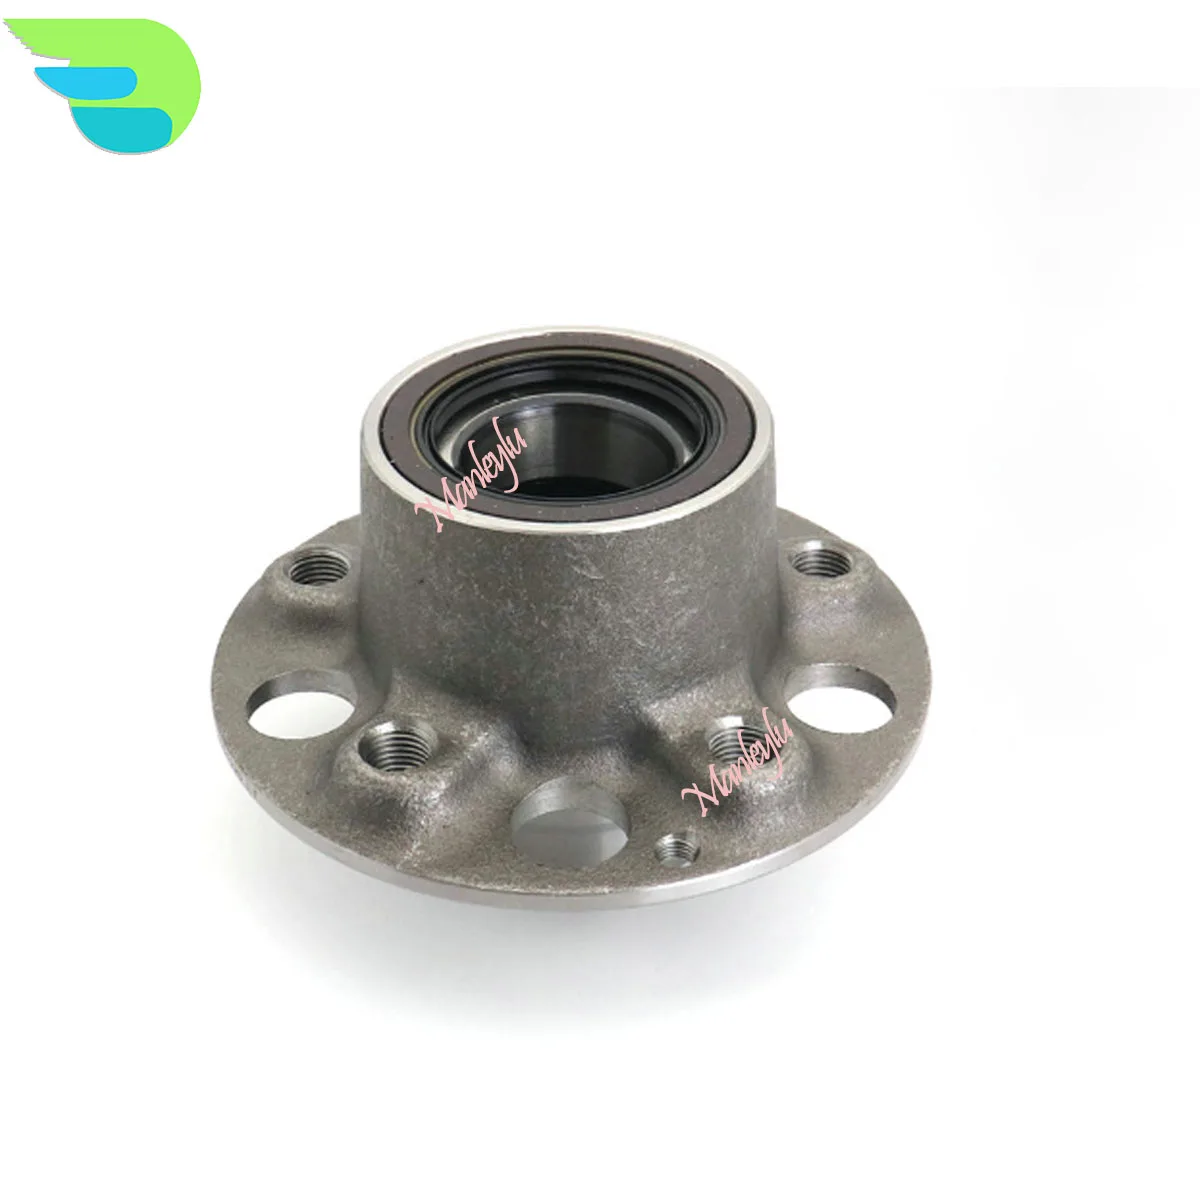 

A2213300225 2213300225 Front Wheel Bearing Assembly For Mercedes-Benz W221 C216 S550 S600 S63 S65 S320 S350 S420 S450